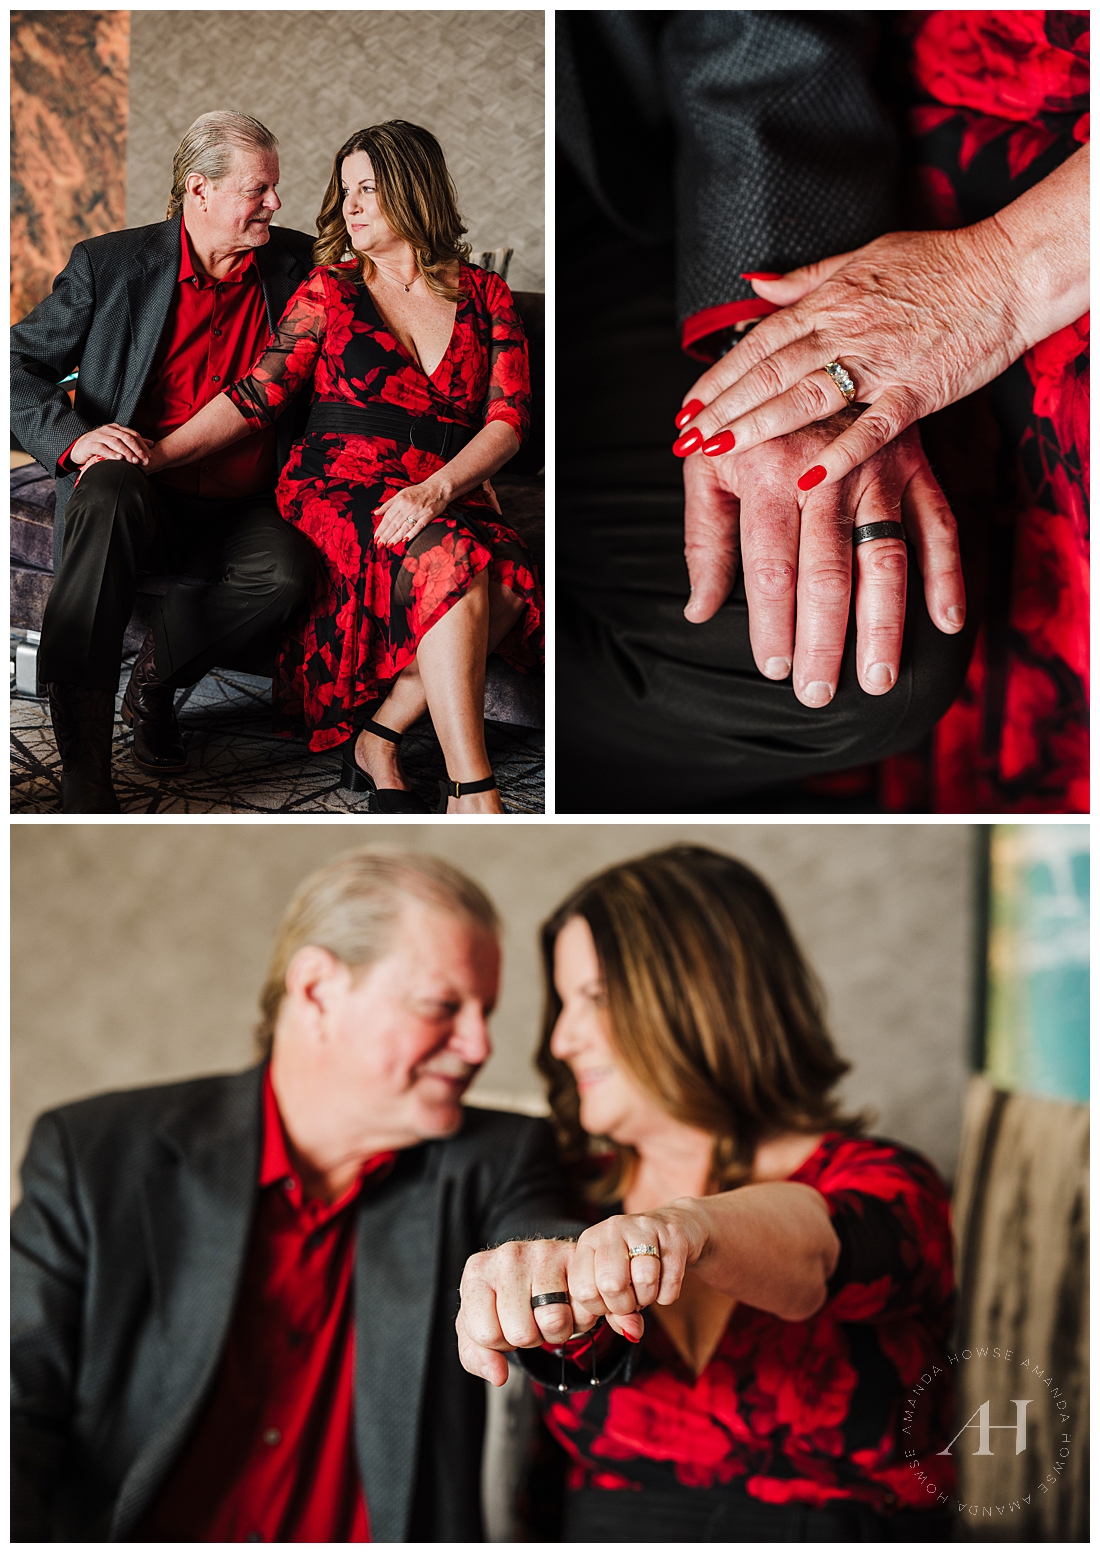 Cute Poses to Showoff Wedding Rings | Photographed by the Best Tacoma Wedding Photographer Amanda Howse Photography